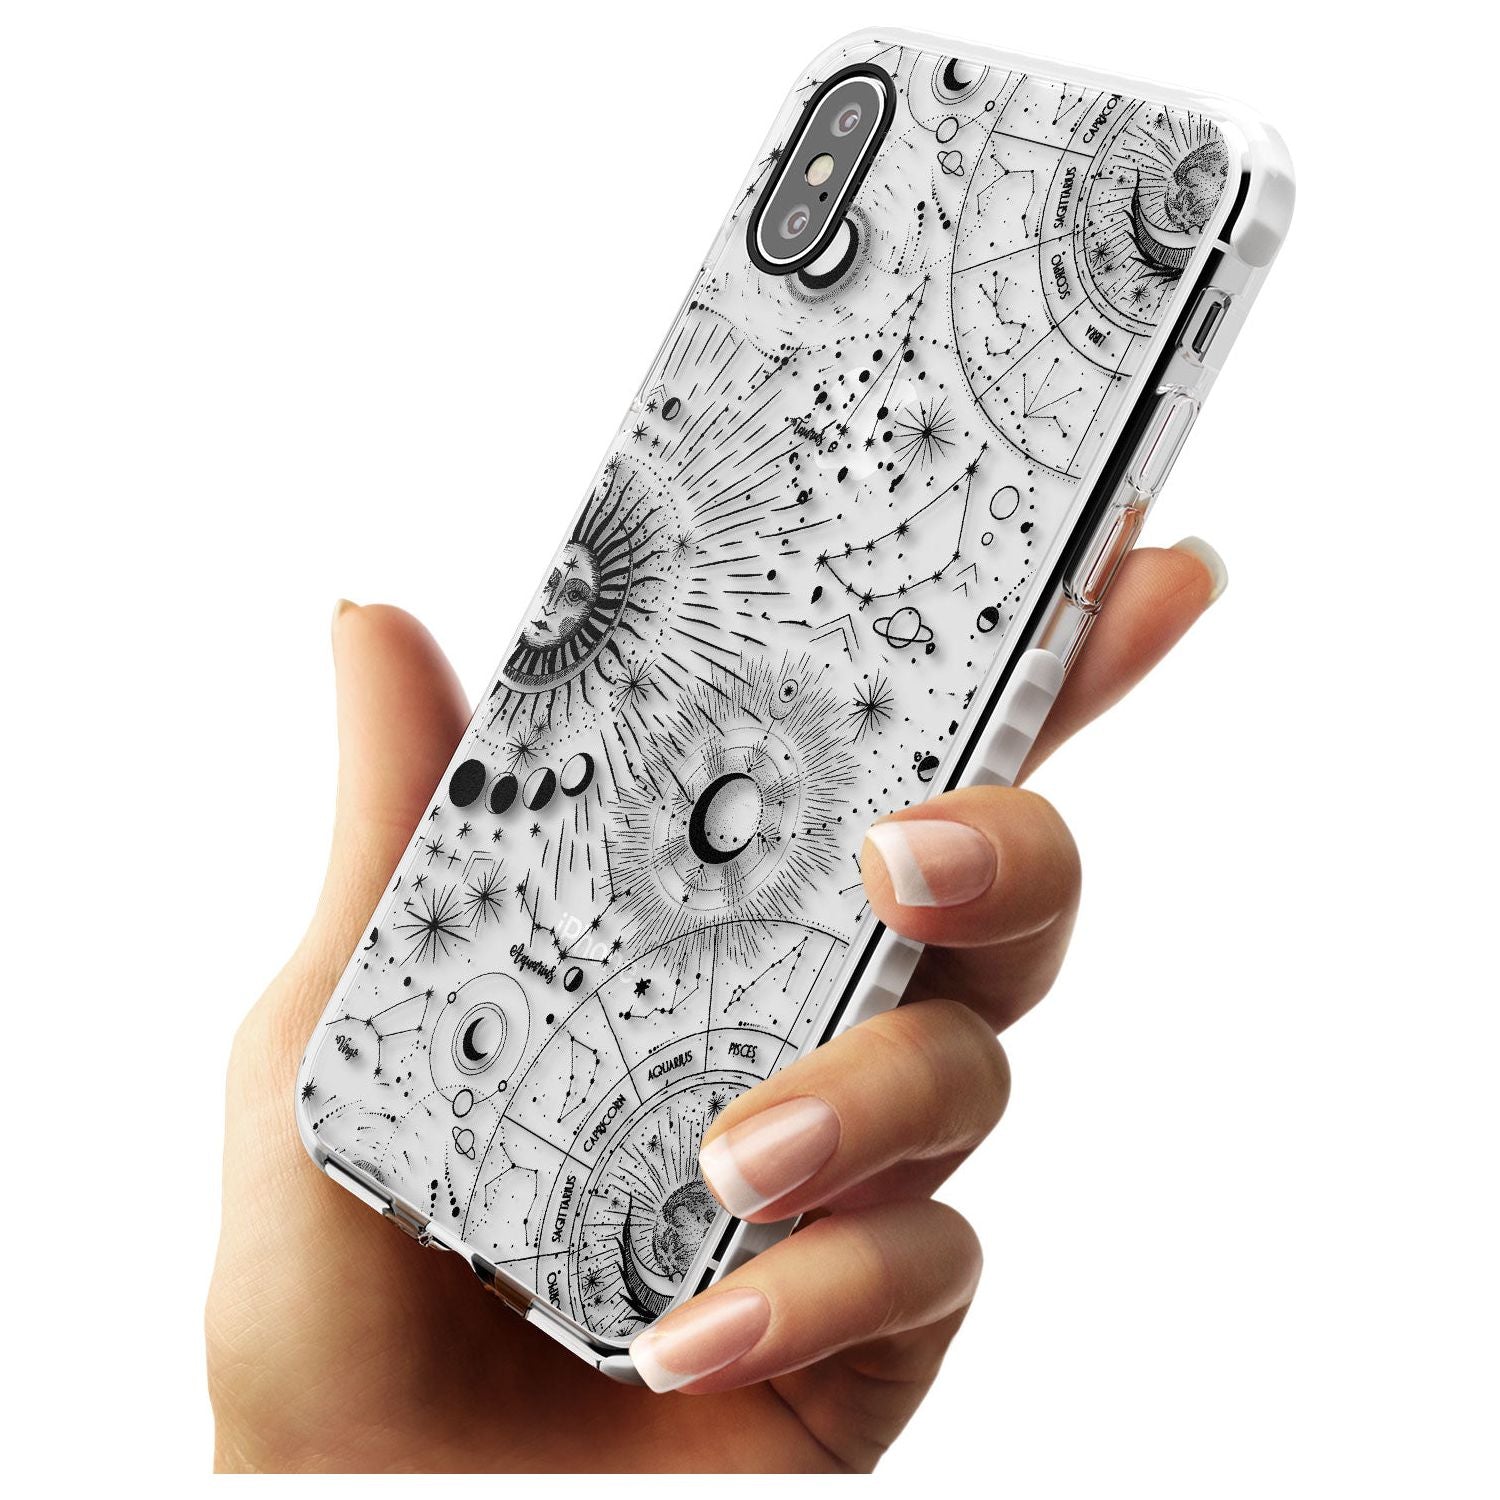 Suns & Constellations Astrological Impact Phone Case for iPhone X XS Max XR